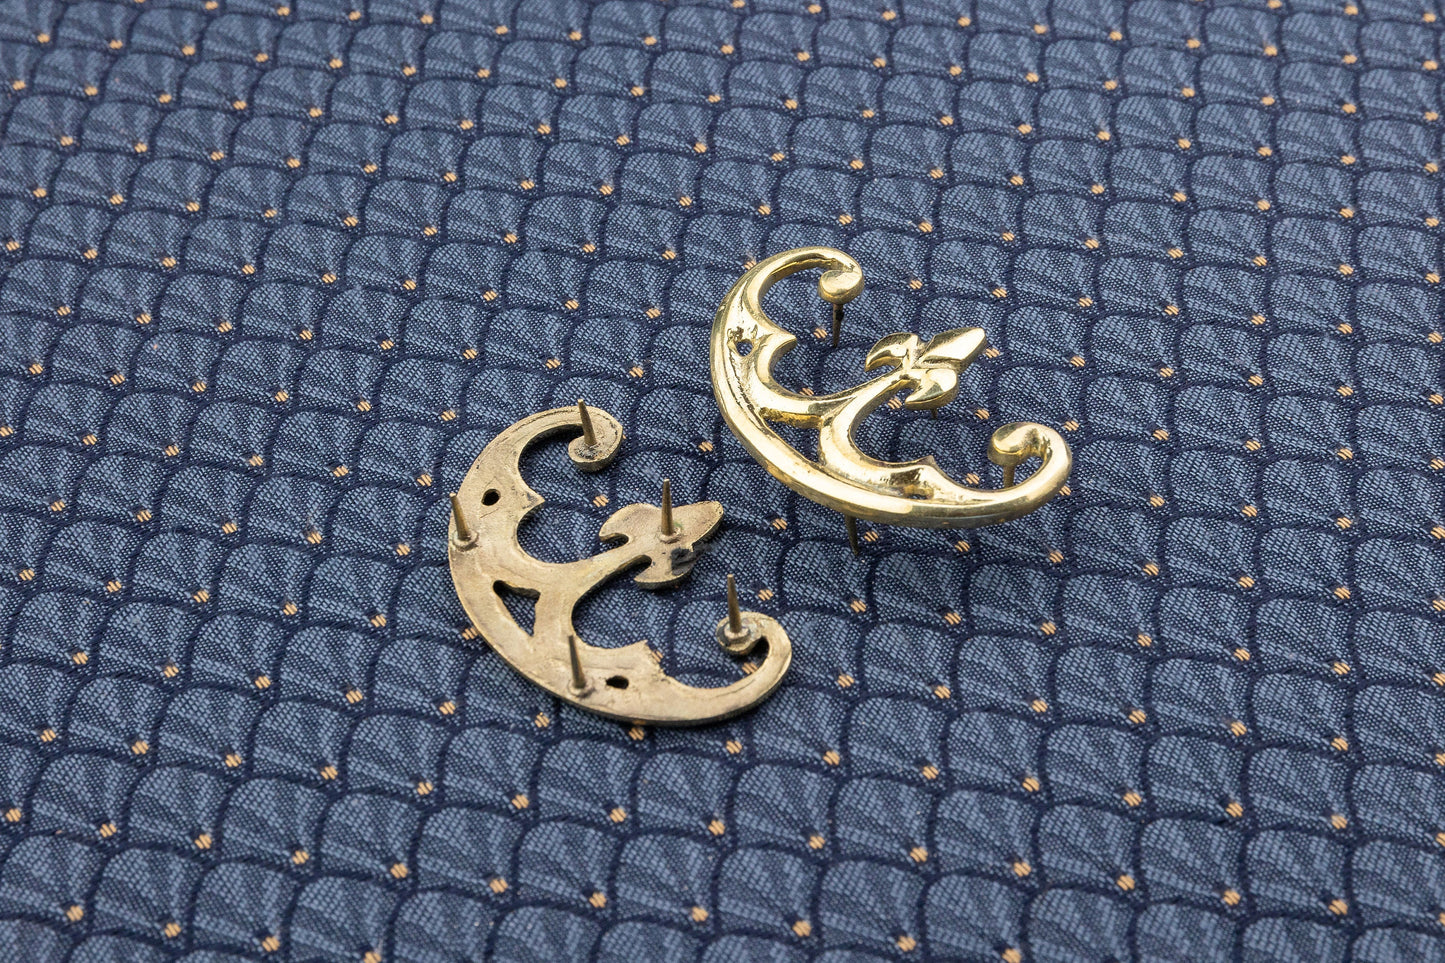 Kidney Purse Fittings in Silver and Gold (pair)